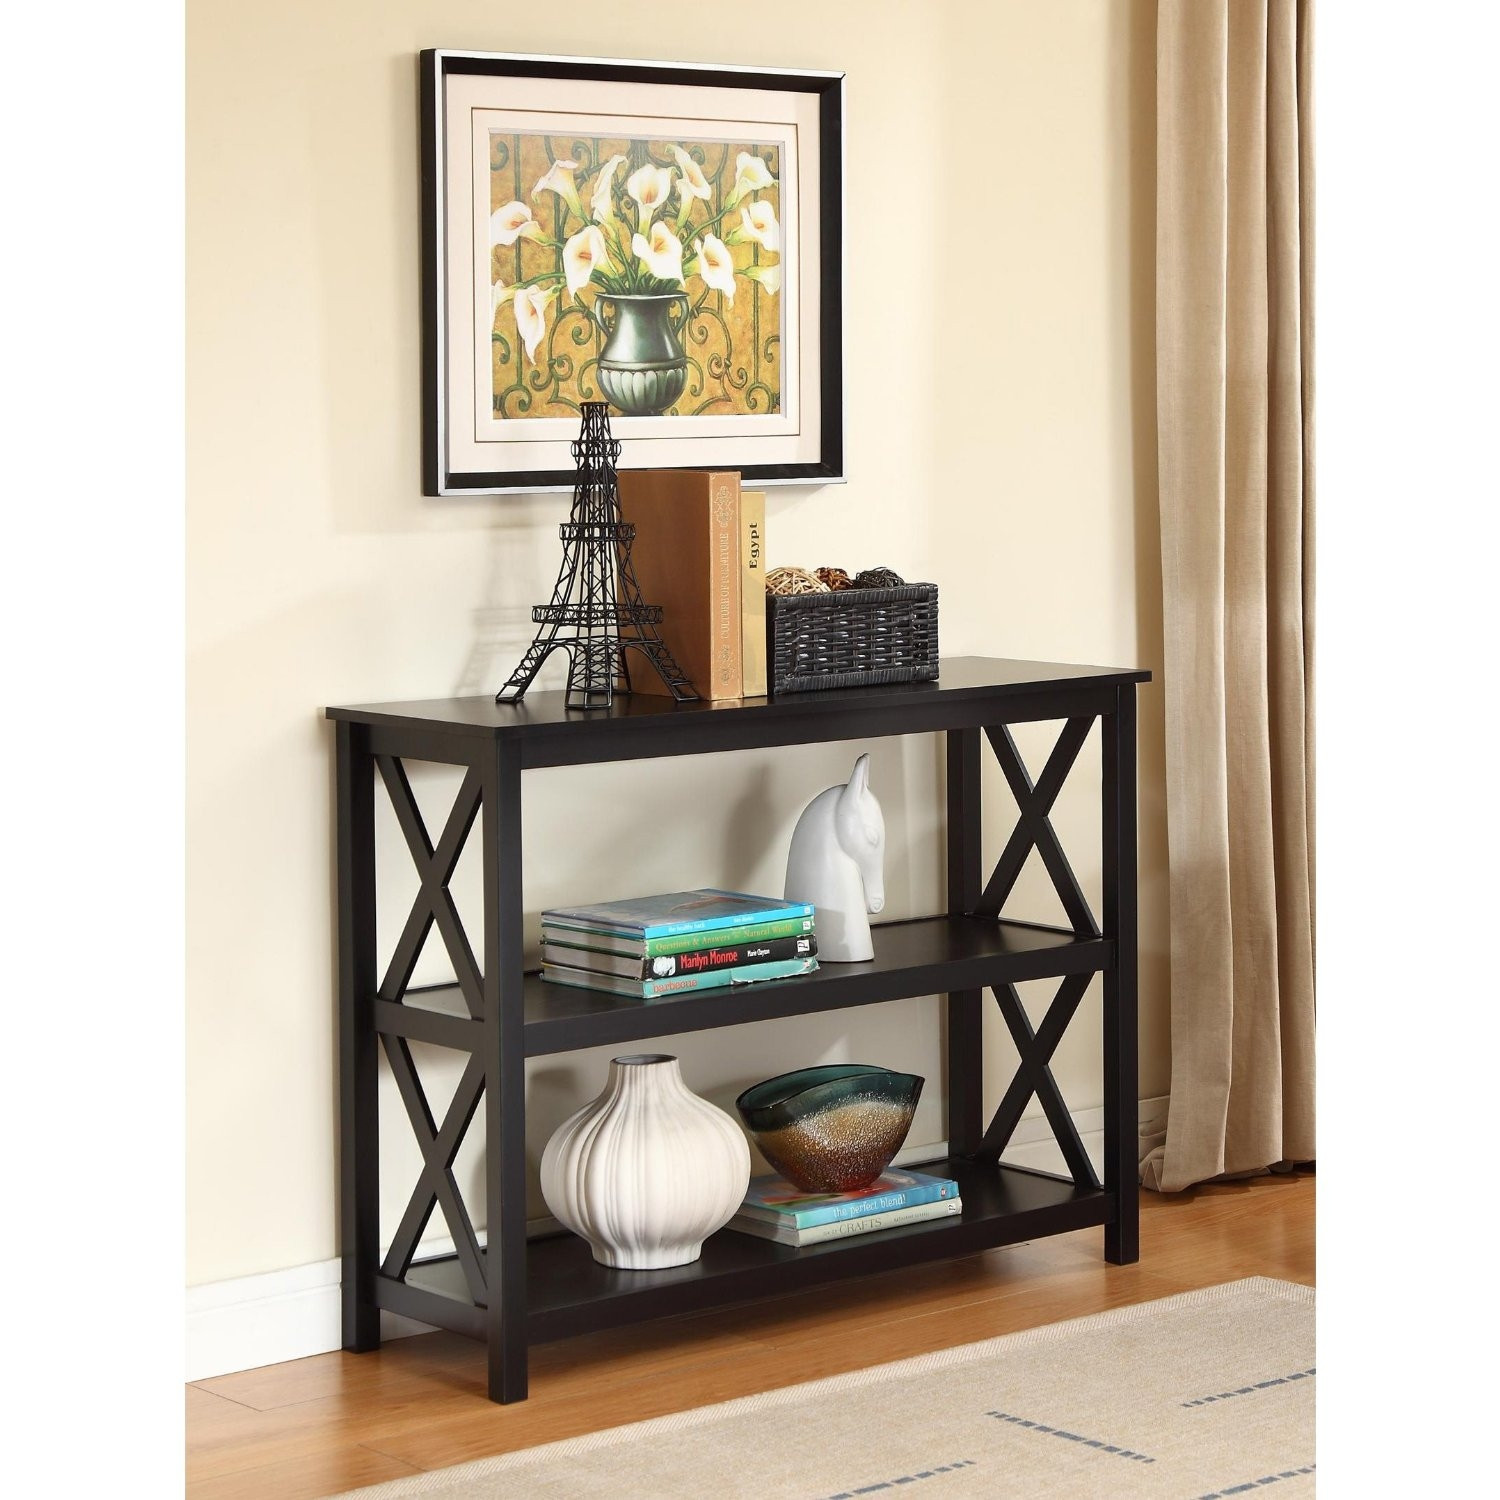 Living Room Console Tables
 3 Tier Black Sofa Table Bookcase Living Room Shelves